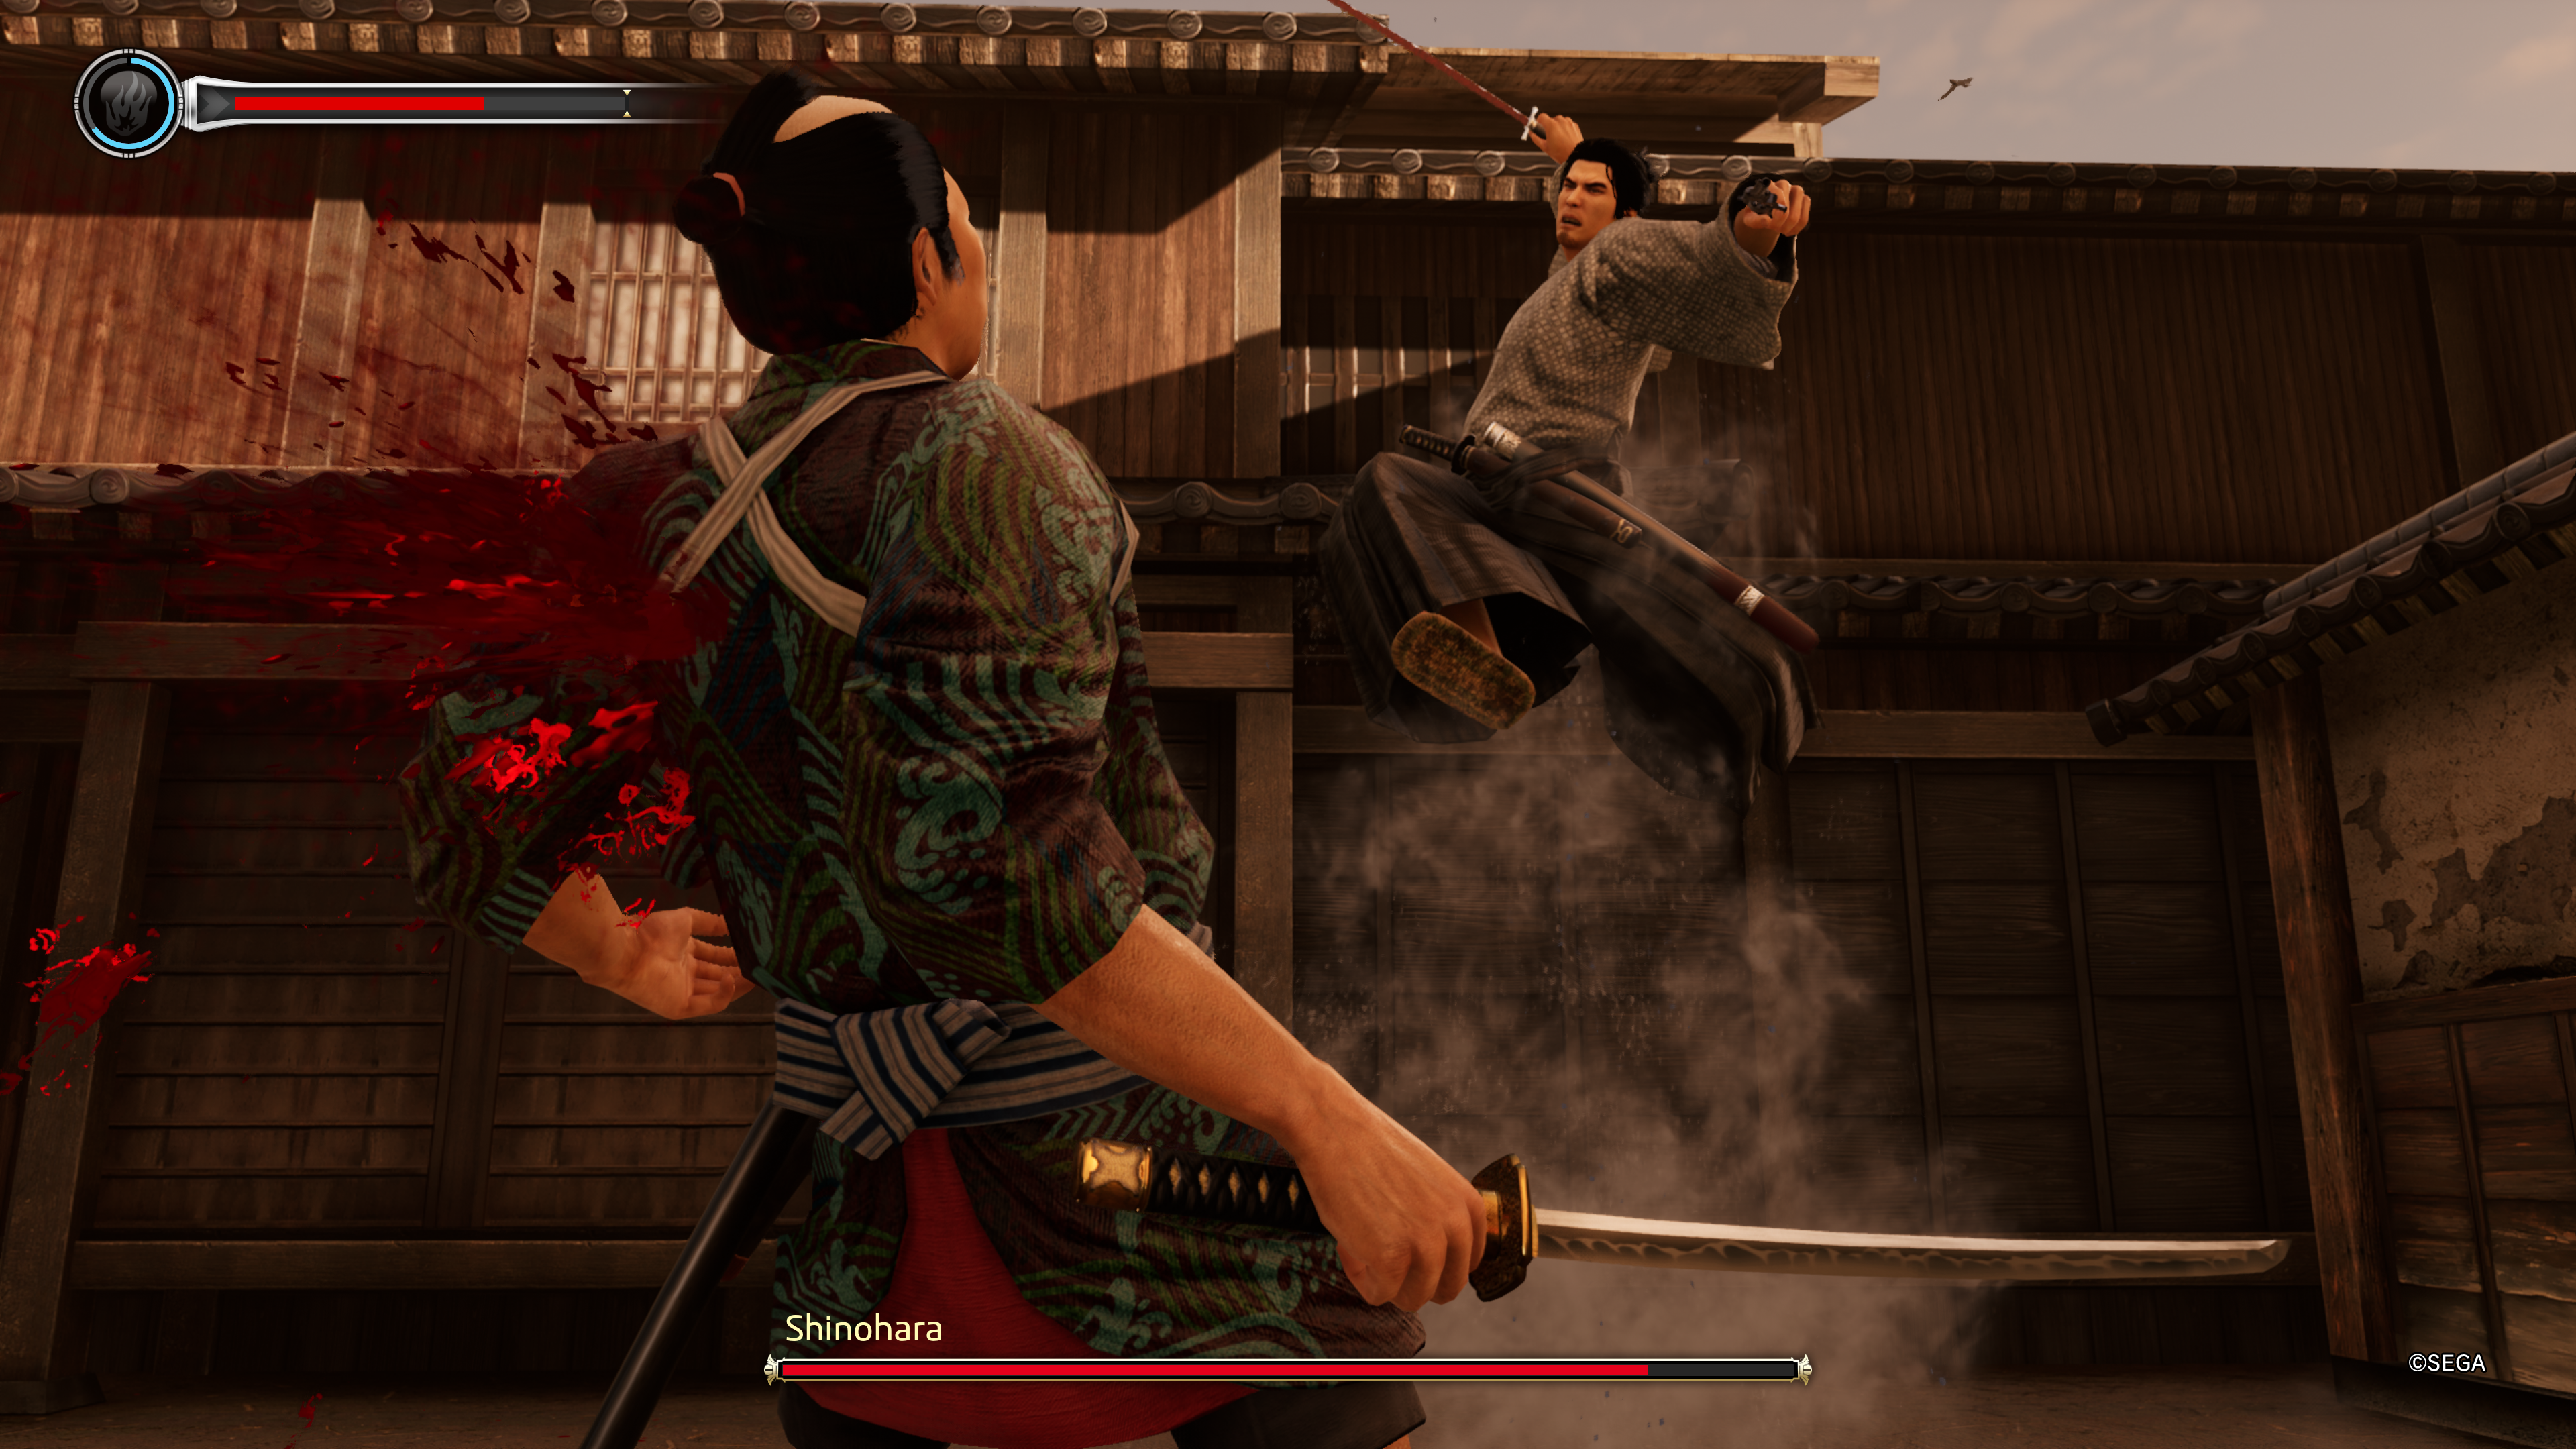 Just like Dragon Ishin commented - fighting Shinohara's boss, when Ryoma lunged at him with a katana, Shinohara's back spurted blood